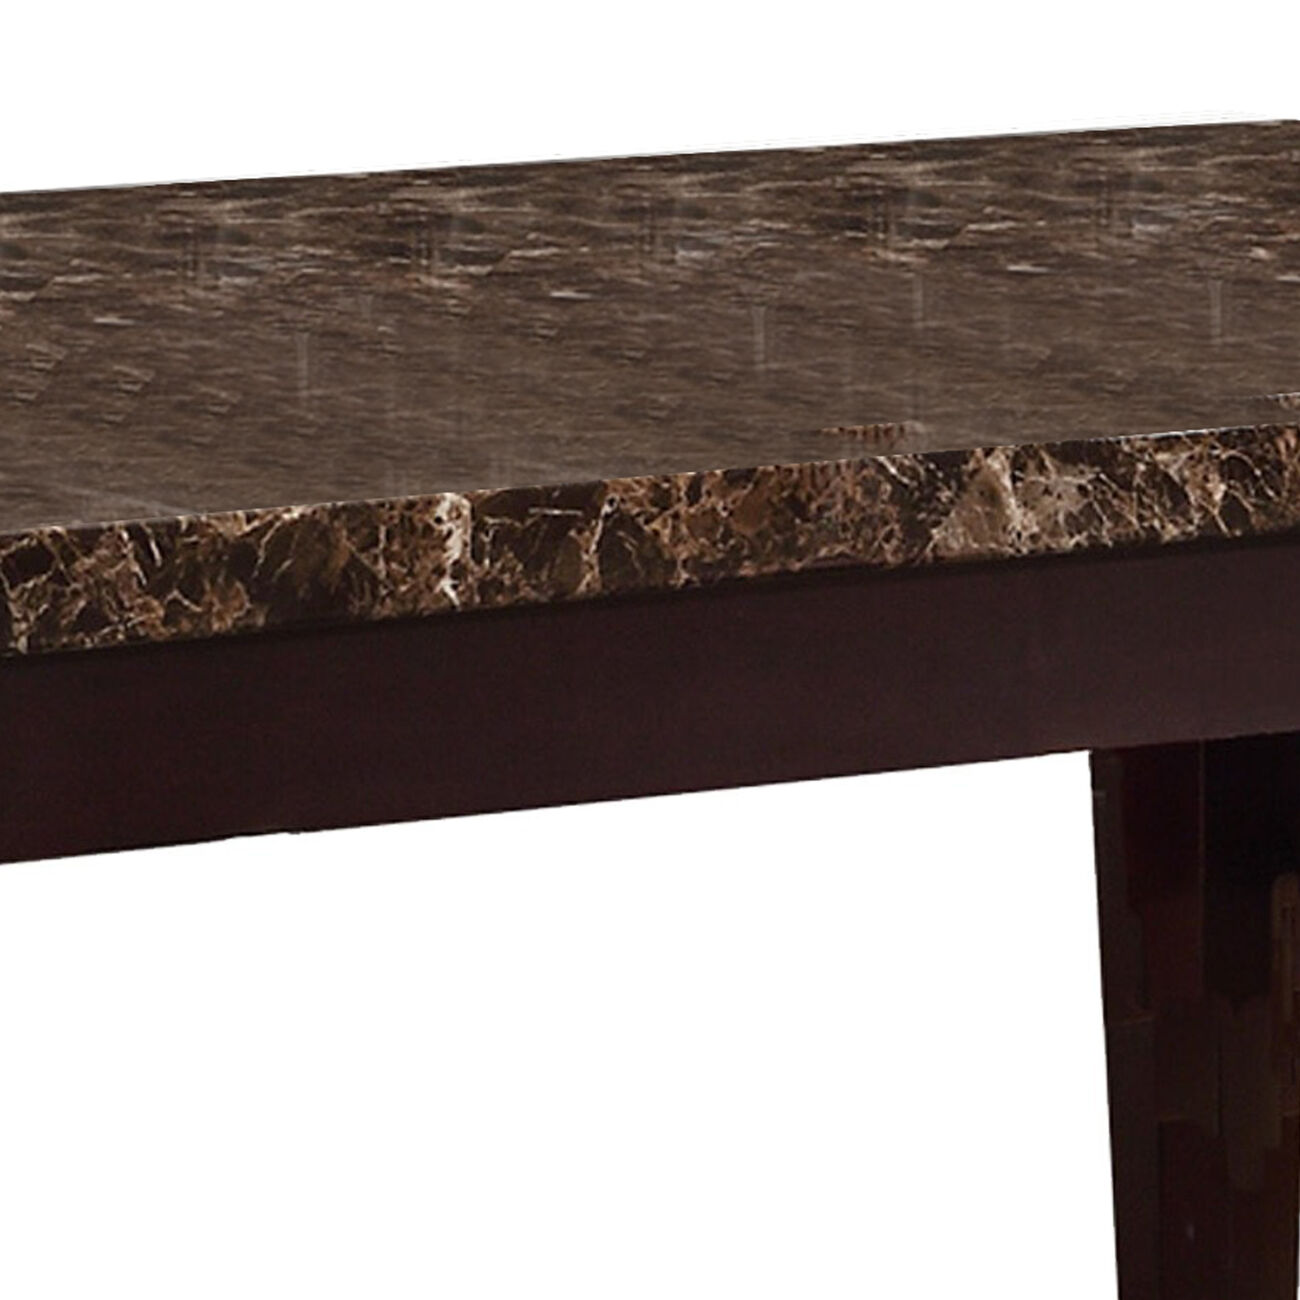 Rectangular Faux Marble Top Dining Table, Espresso Brown